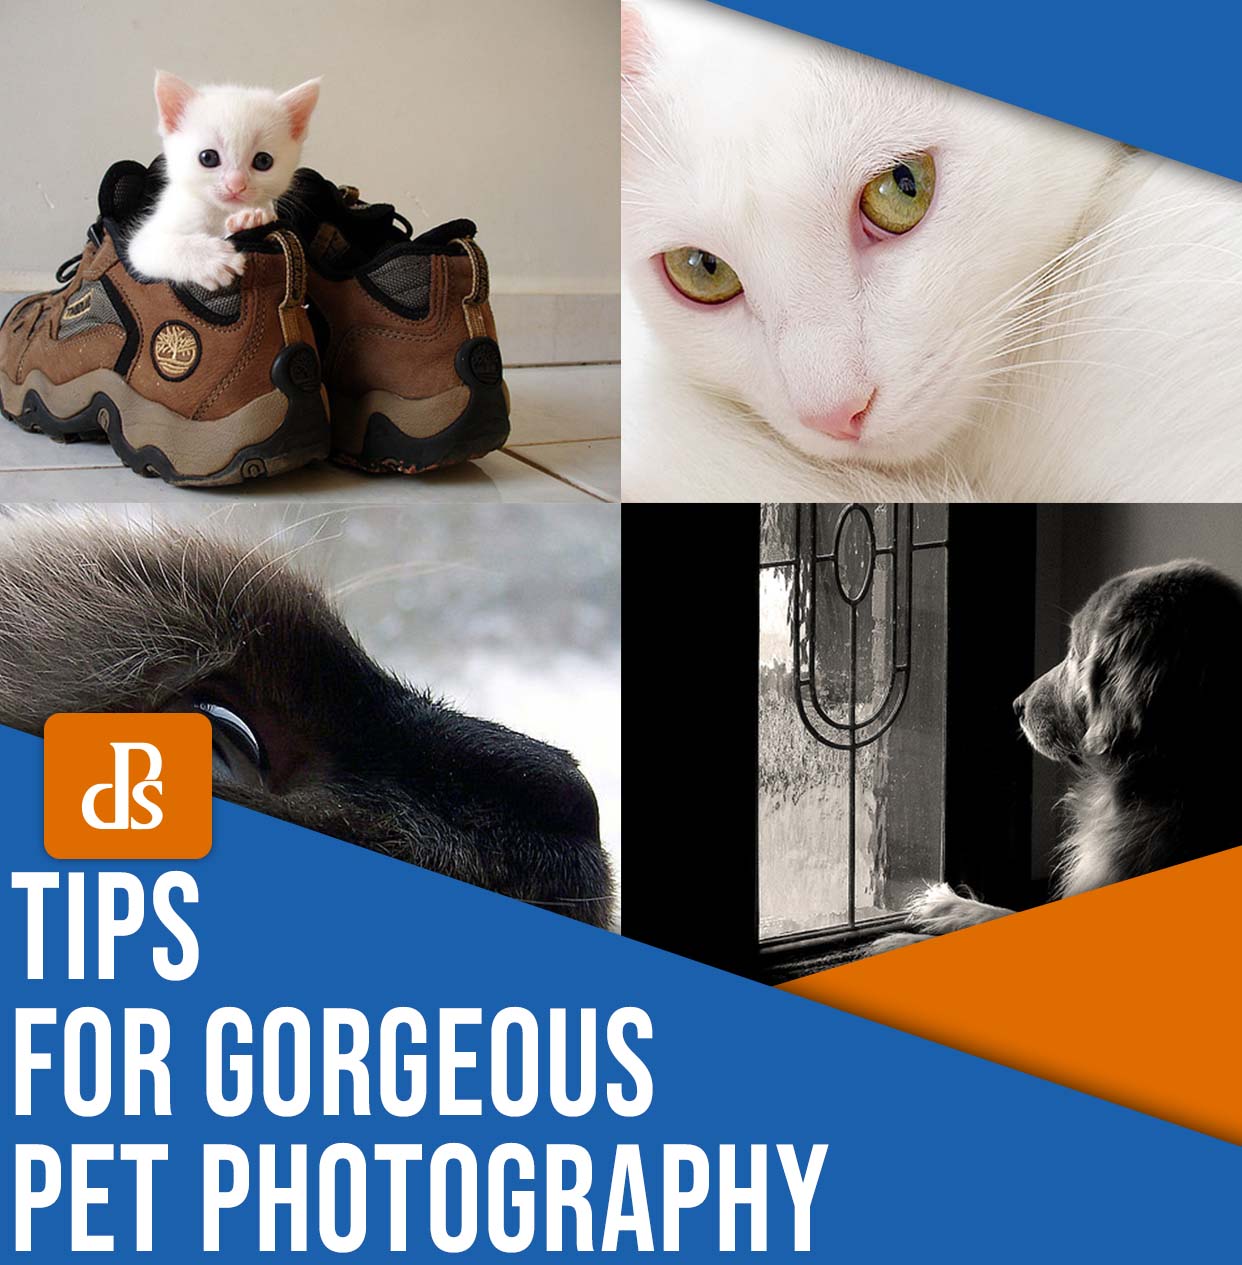 Tips for gorgeous pet photography